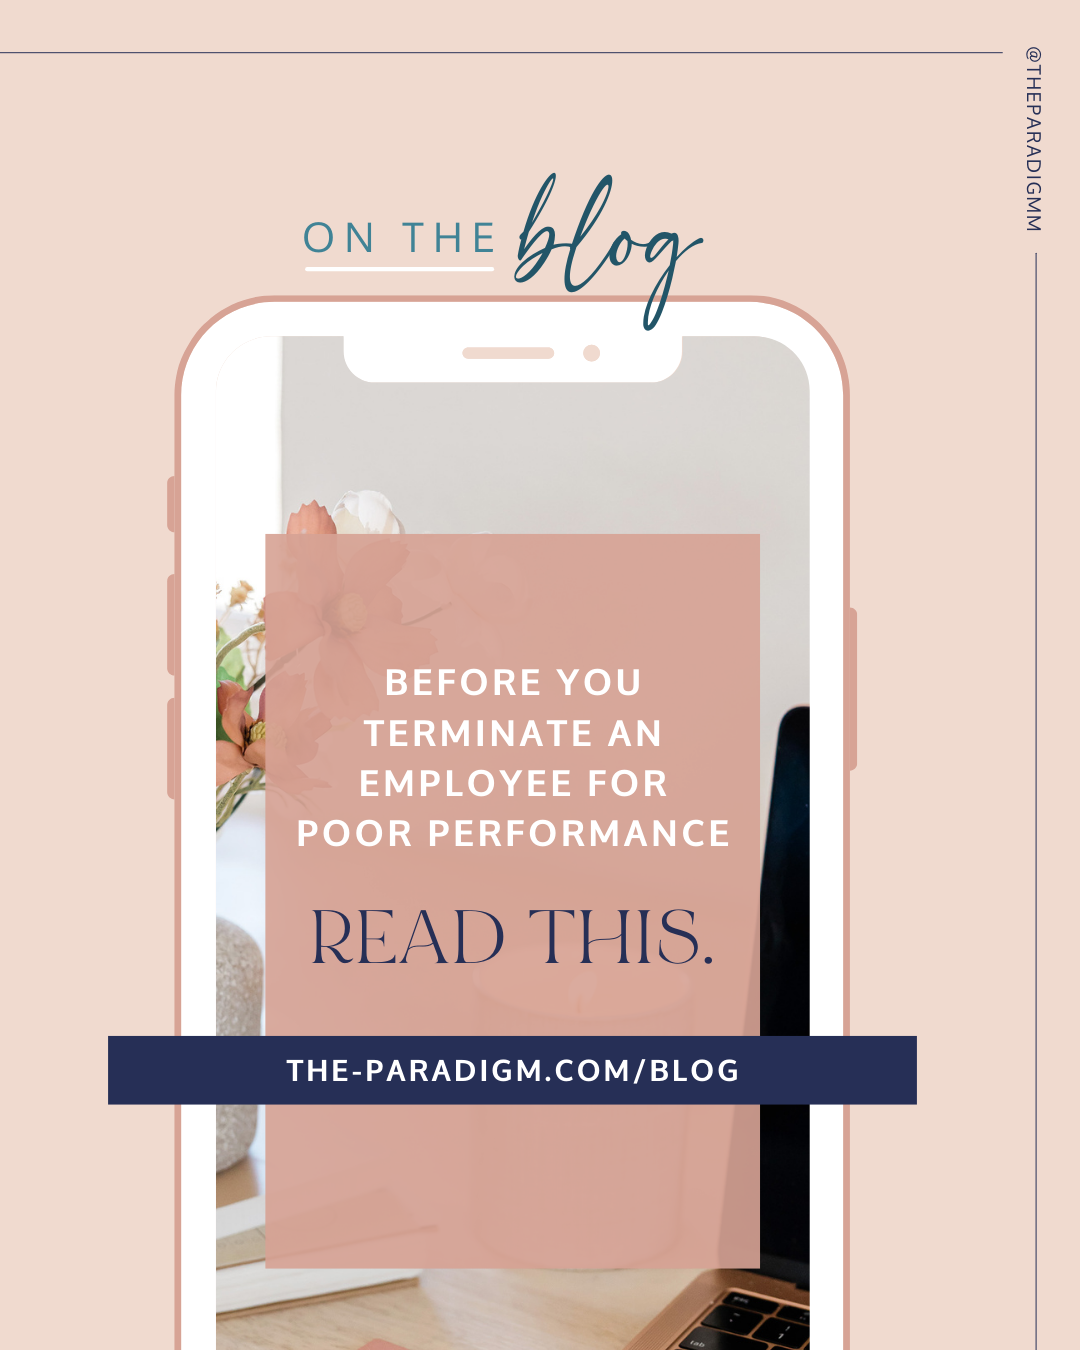 On the blog before you terminate an employee for poor performance read this. 